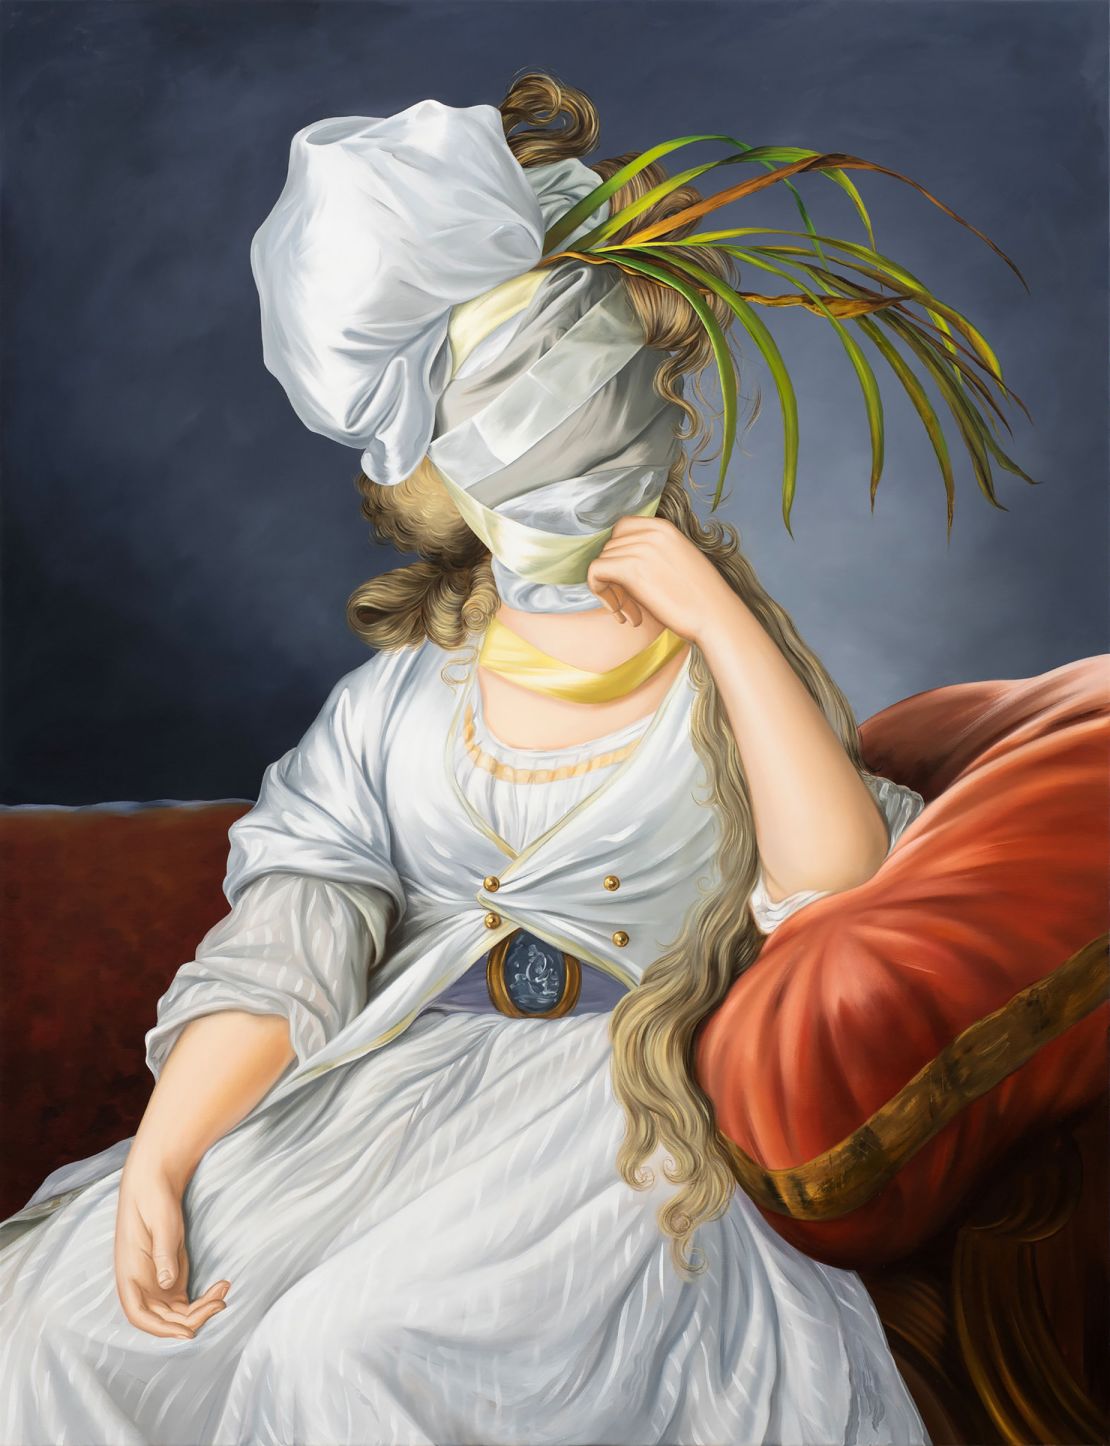 Juszkiewicz disrupts the form of classical portraiture by obscuring the faces of her imagined sitters, as shown here in "Untitled (after Élisabeth Vigée Le Brun)," 2020.